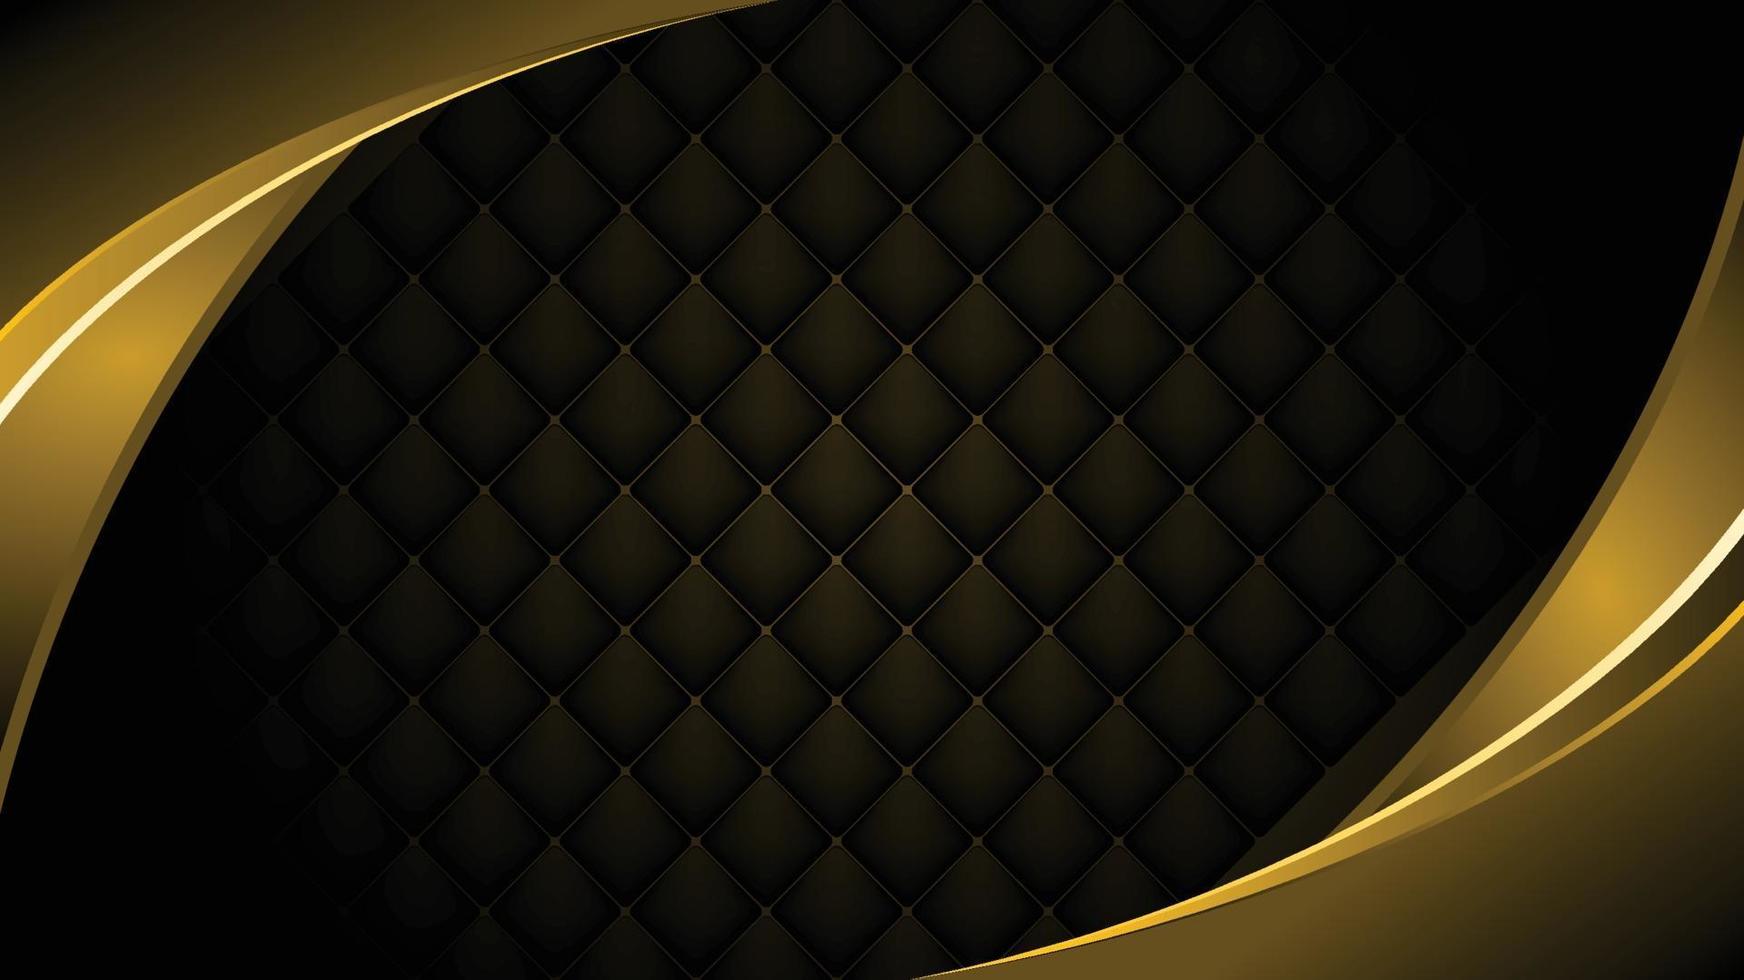 Background image of black diamond arranged repeatedly into patterns. vector